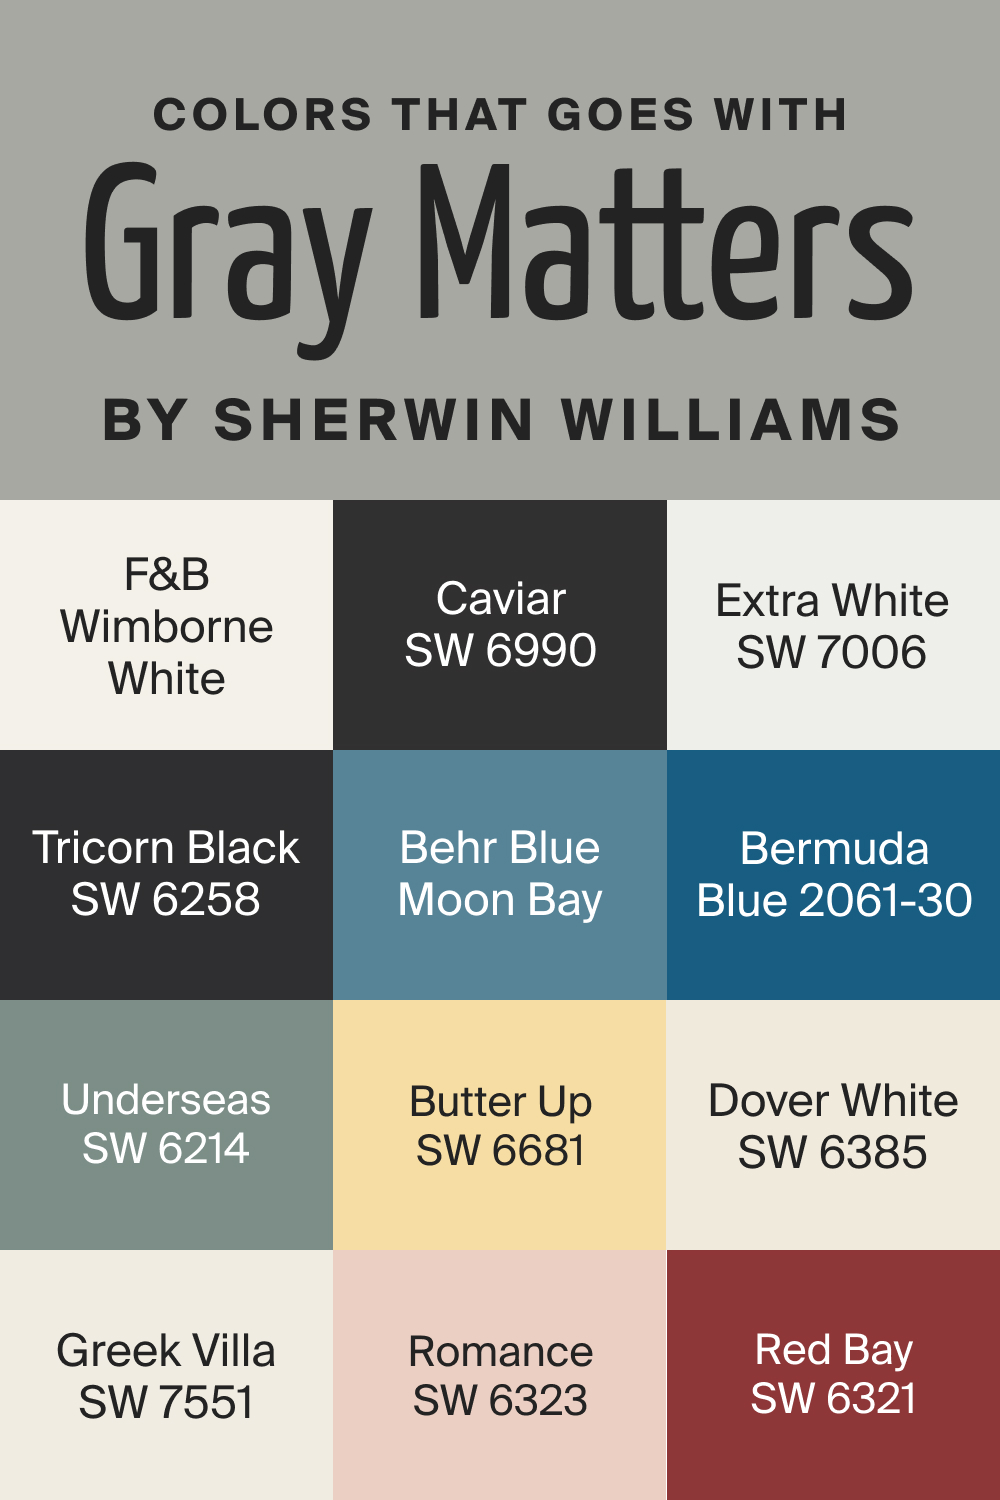 Colors that goes with Gray Matters SW 7066 by Sherwin Williams